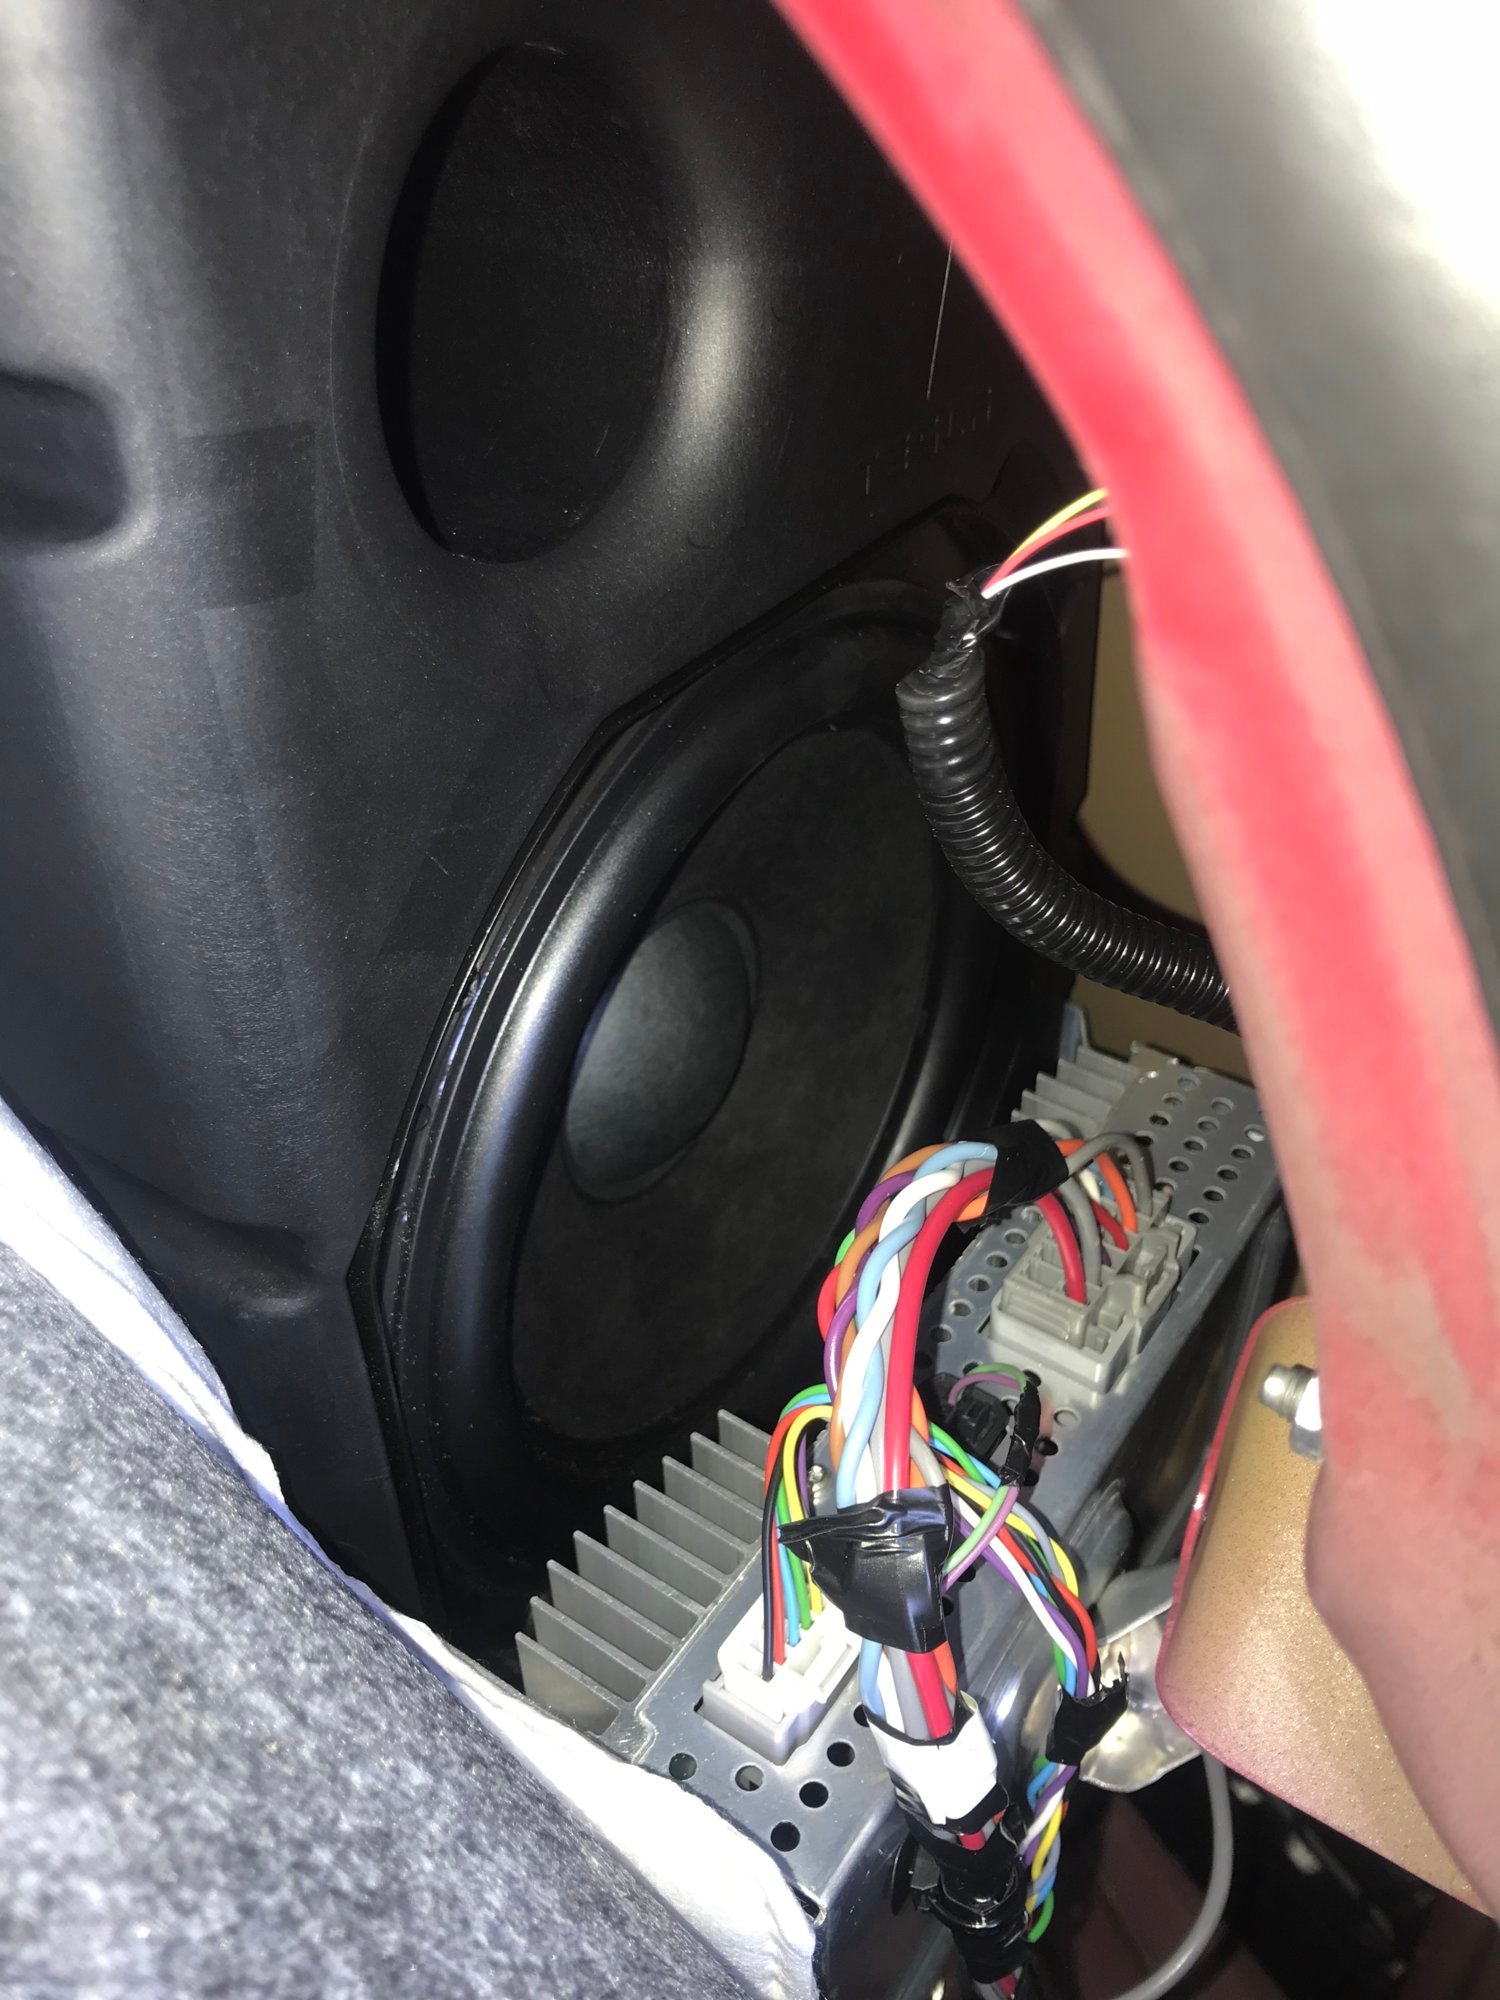 So That's Where They Hid the Model 3 Subwoofer... | Tesla Motors Club